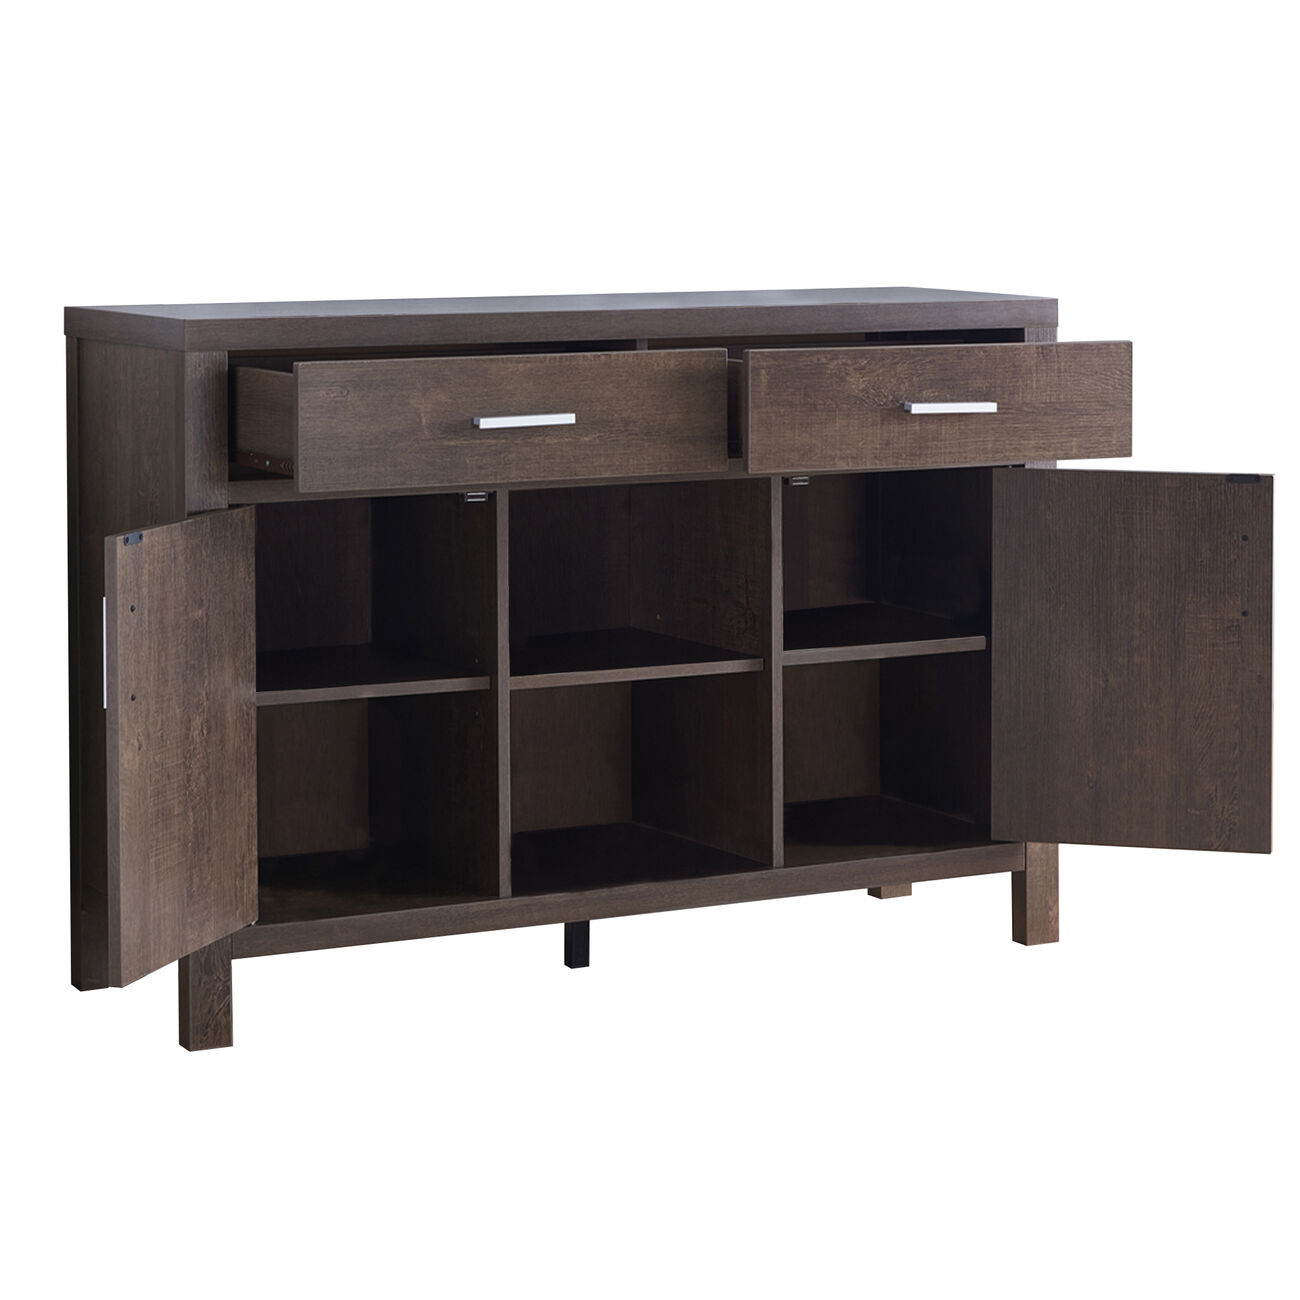 Wooden Buffet with 2 Drawers and 2 Door Cabinets, Walnut Oak